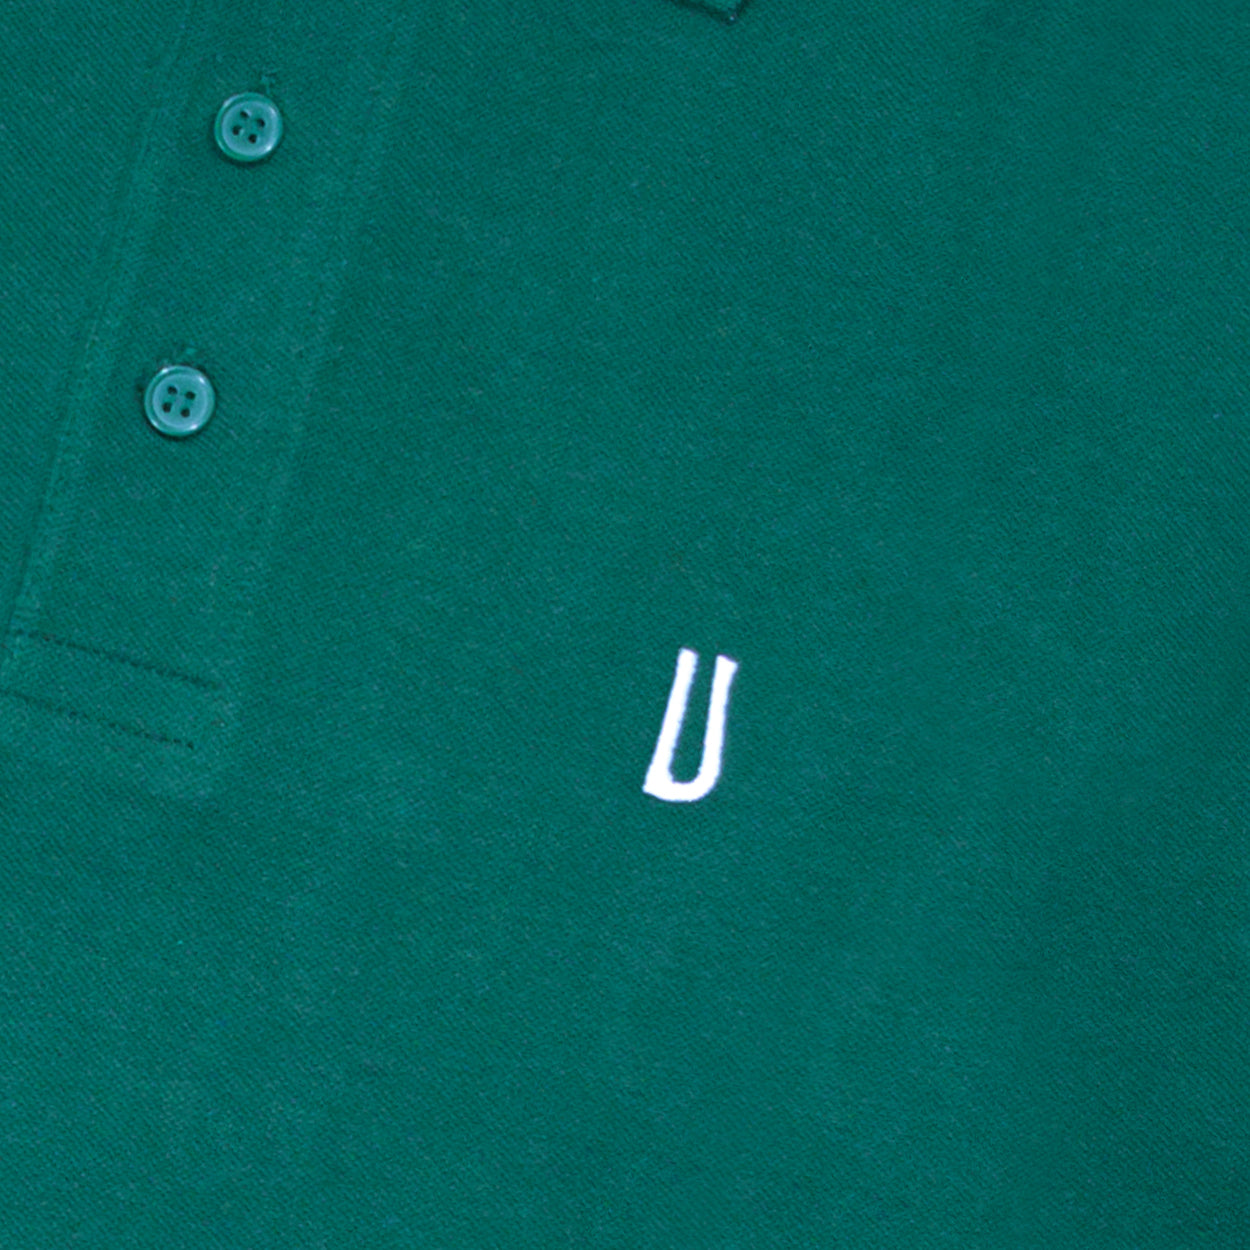 Green polo shirt with white Ulturale logo